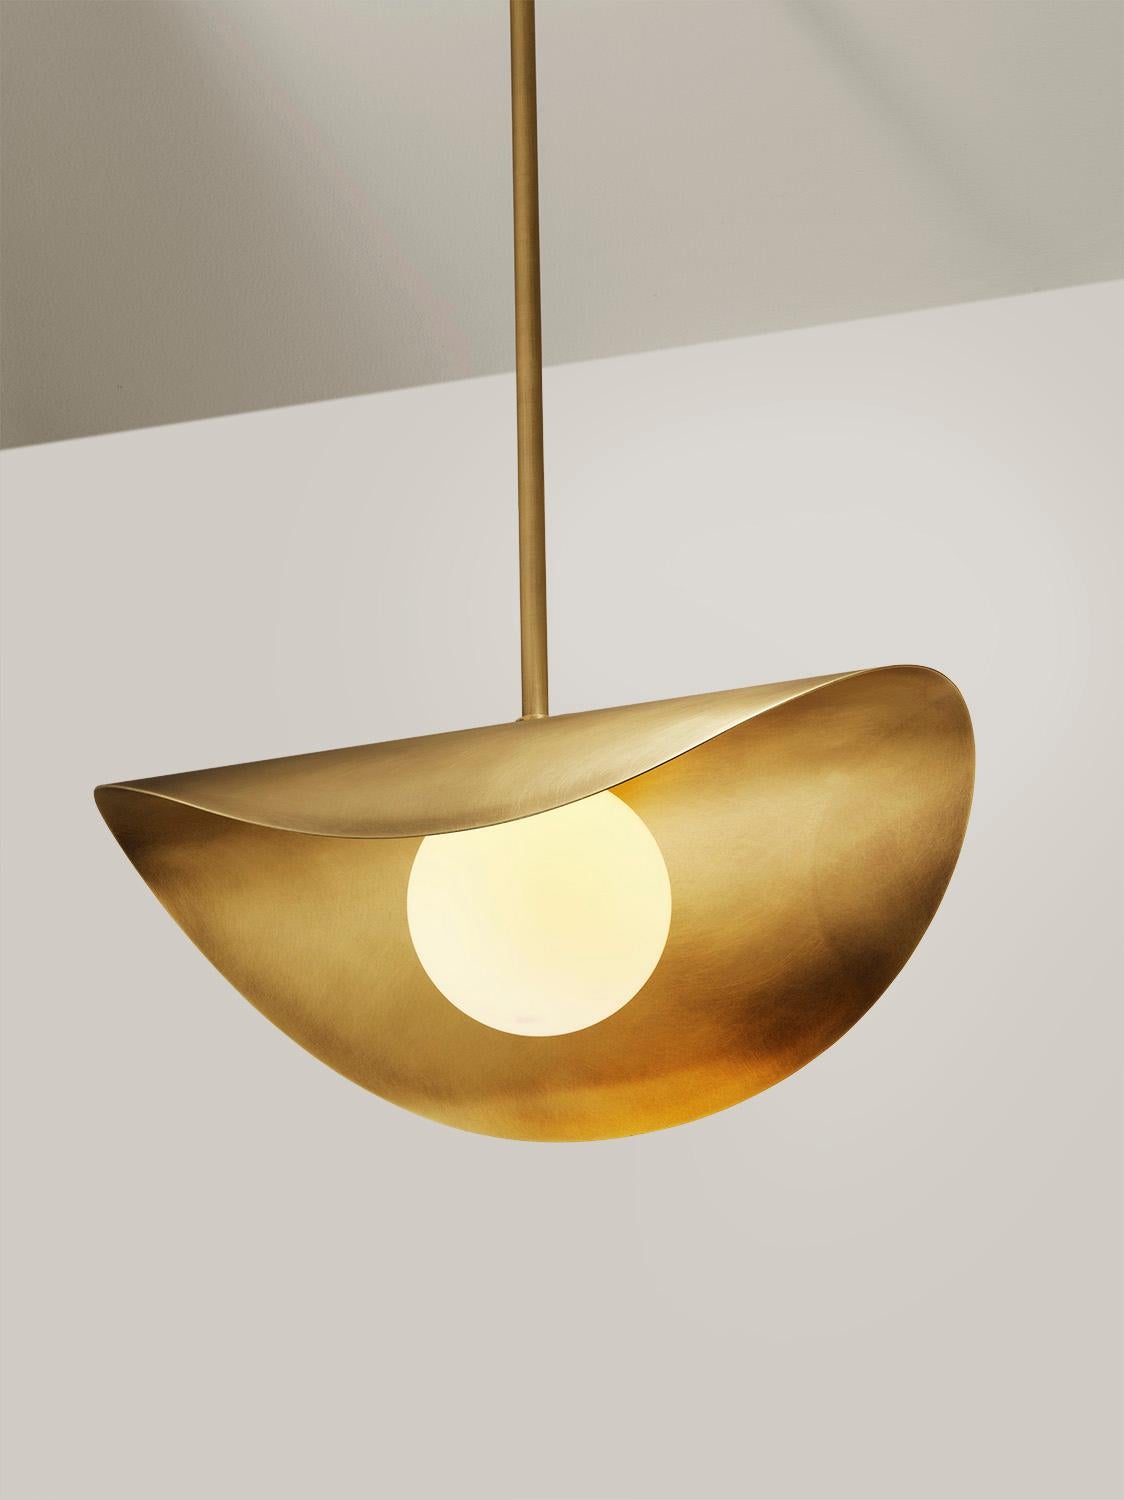 Introducing the Petite Montera, a charming rendition of our beloved Montera pendant, scaled down for a more intimate ambiance. Crafted with the same organic flair, its undulating, biomorphic form gracefully crowns a petite blown satin glass globe.